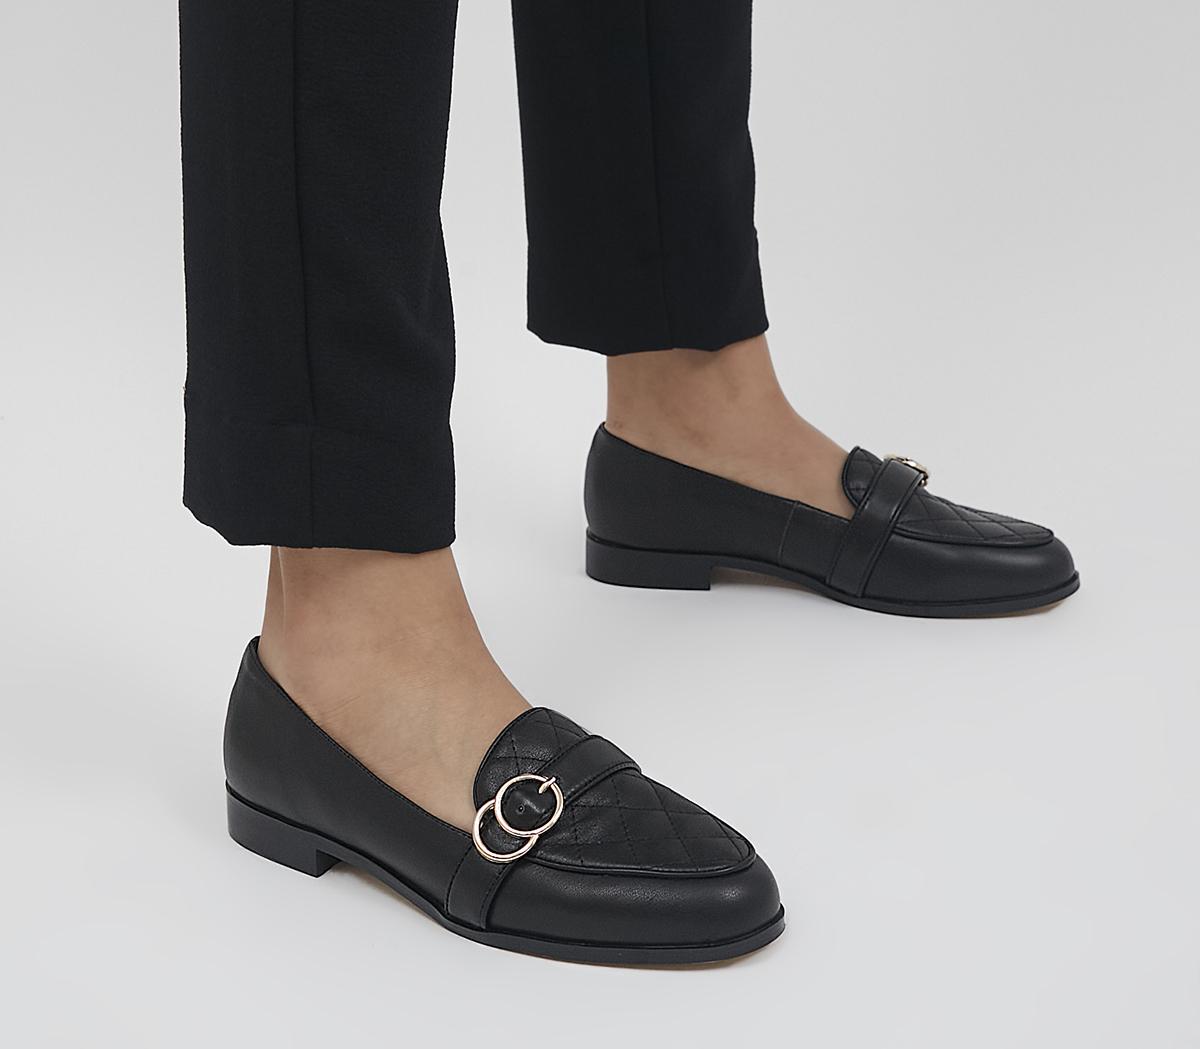 OFFICE Furnace Quilted Buckle Detail Loafers Black Leather - Women’s ...